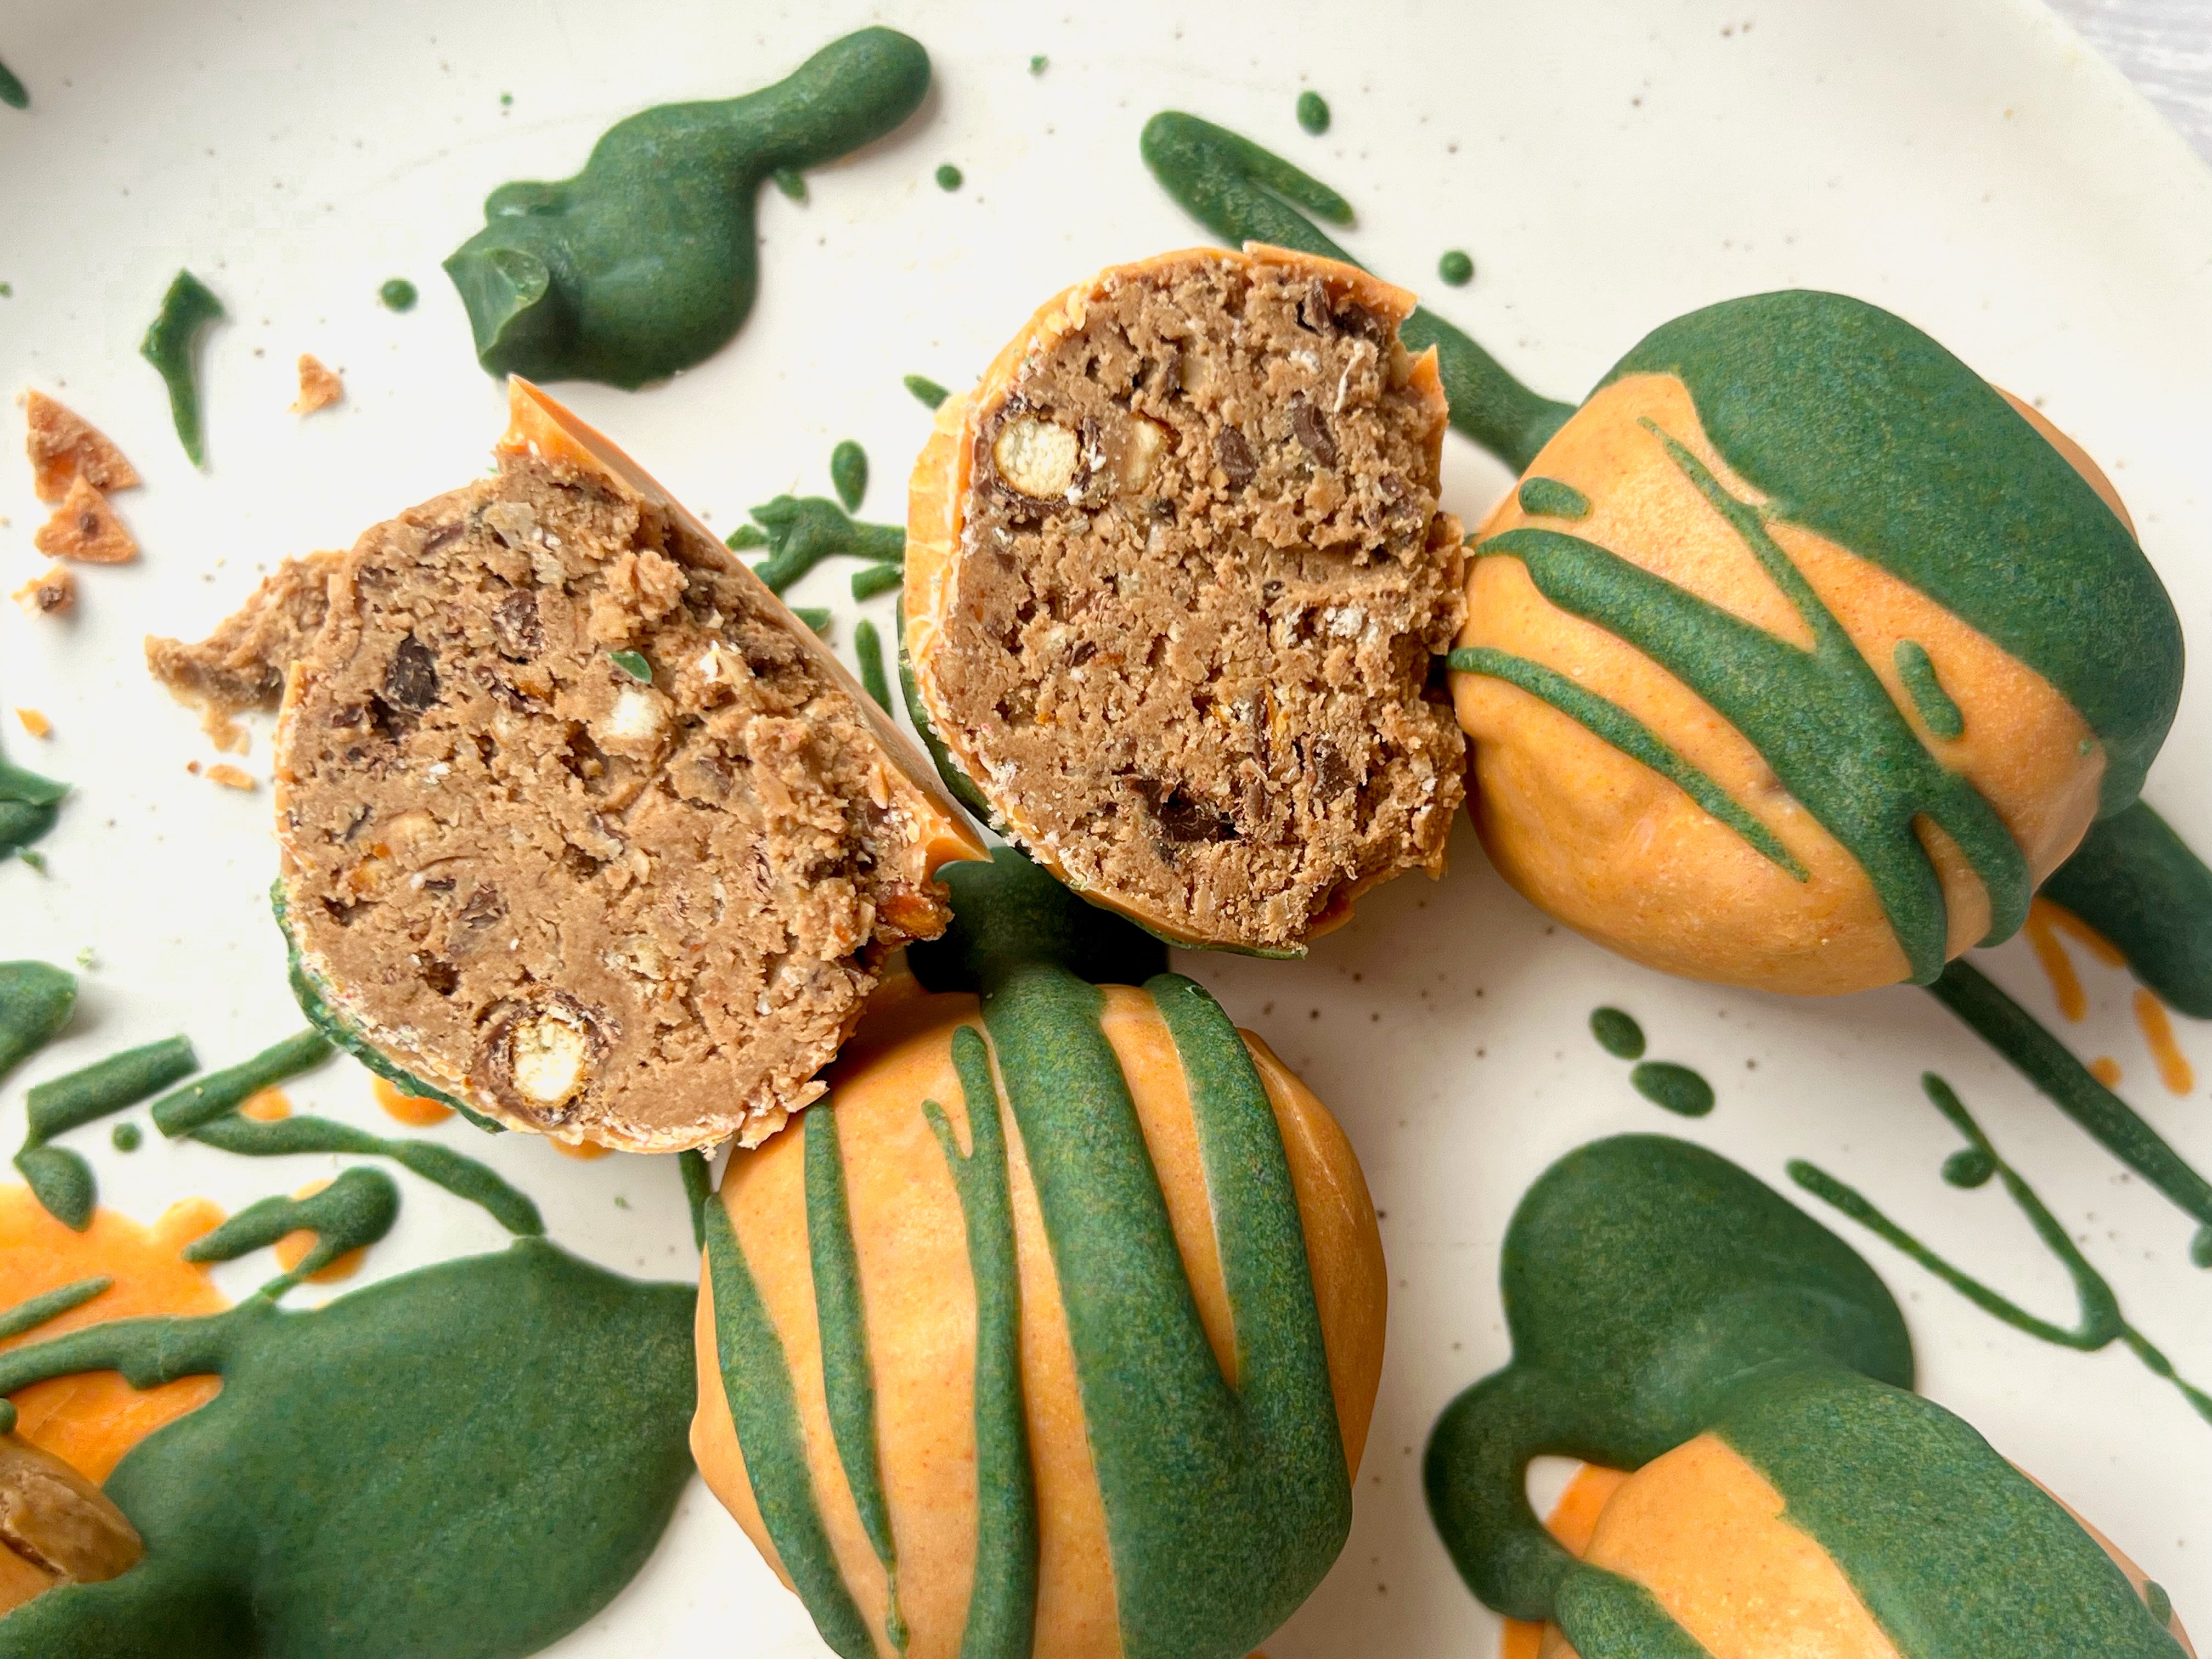 “Carrot” Sweet & Salty Protein Balls